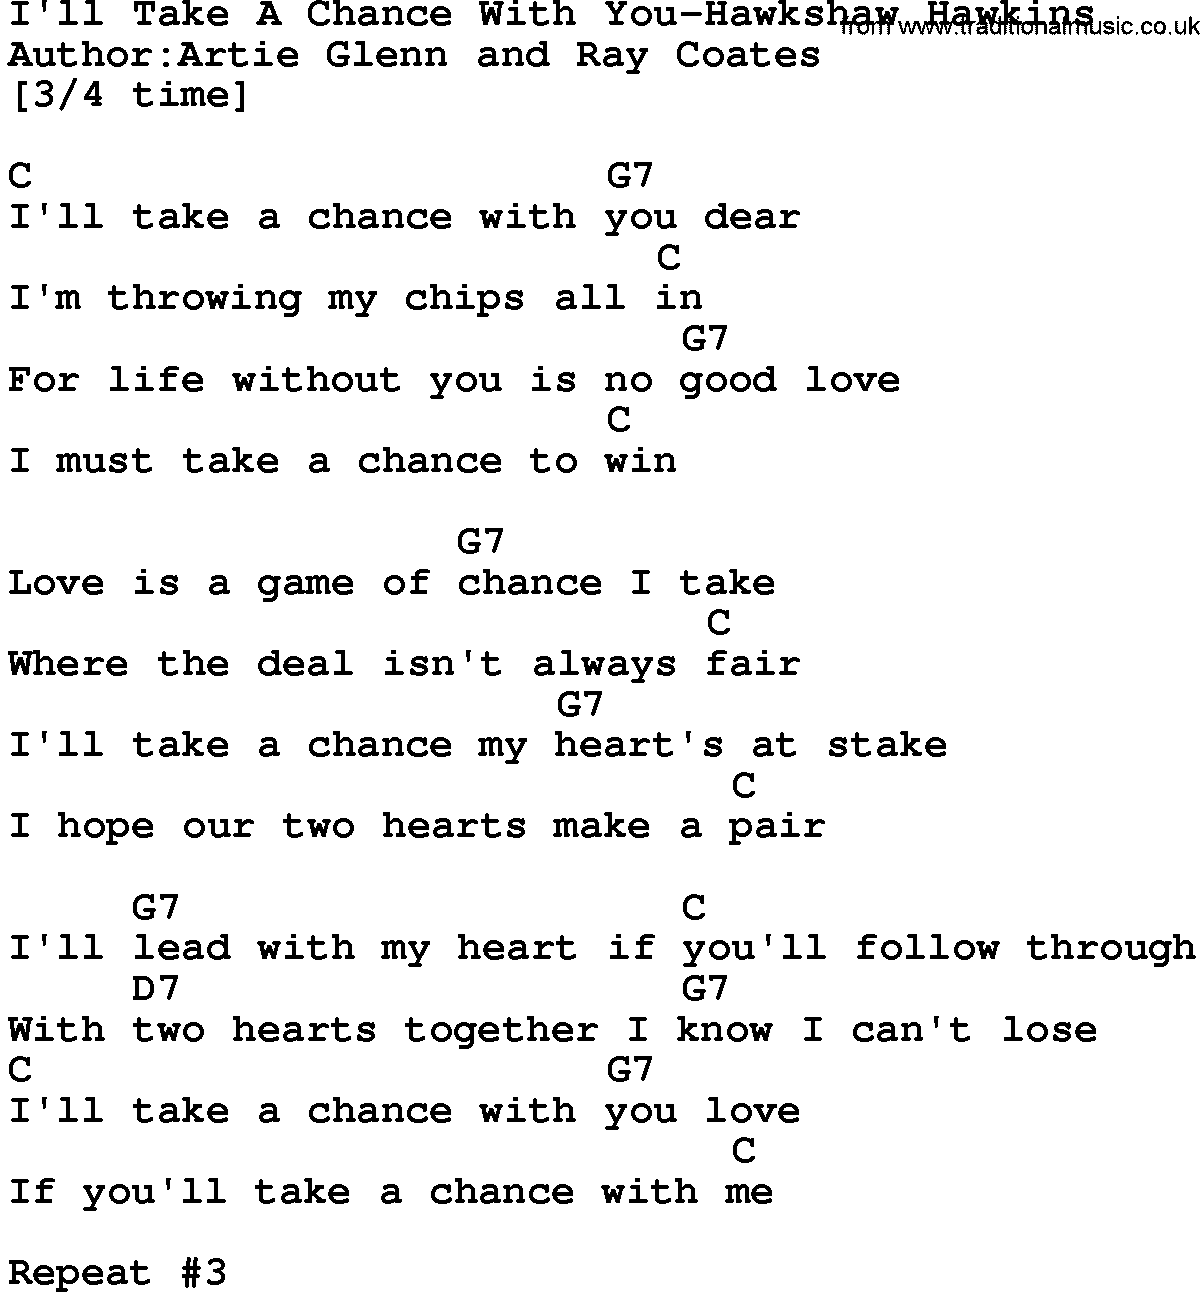 Country music song: I'll Take A Chance With You-Hawkshaw Hawkins lyrics and chords